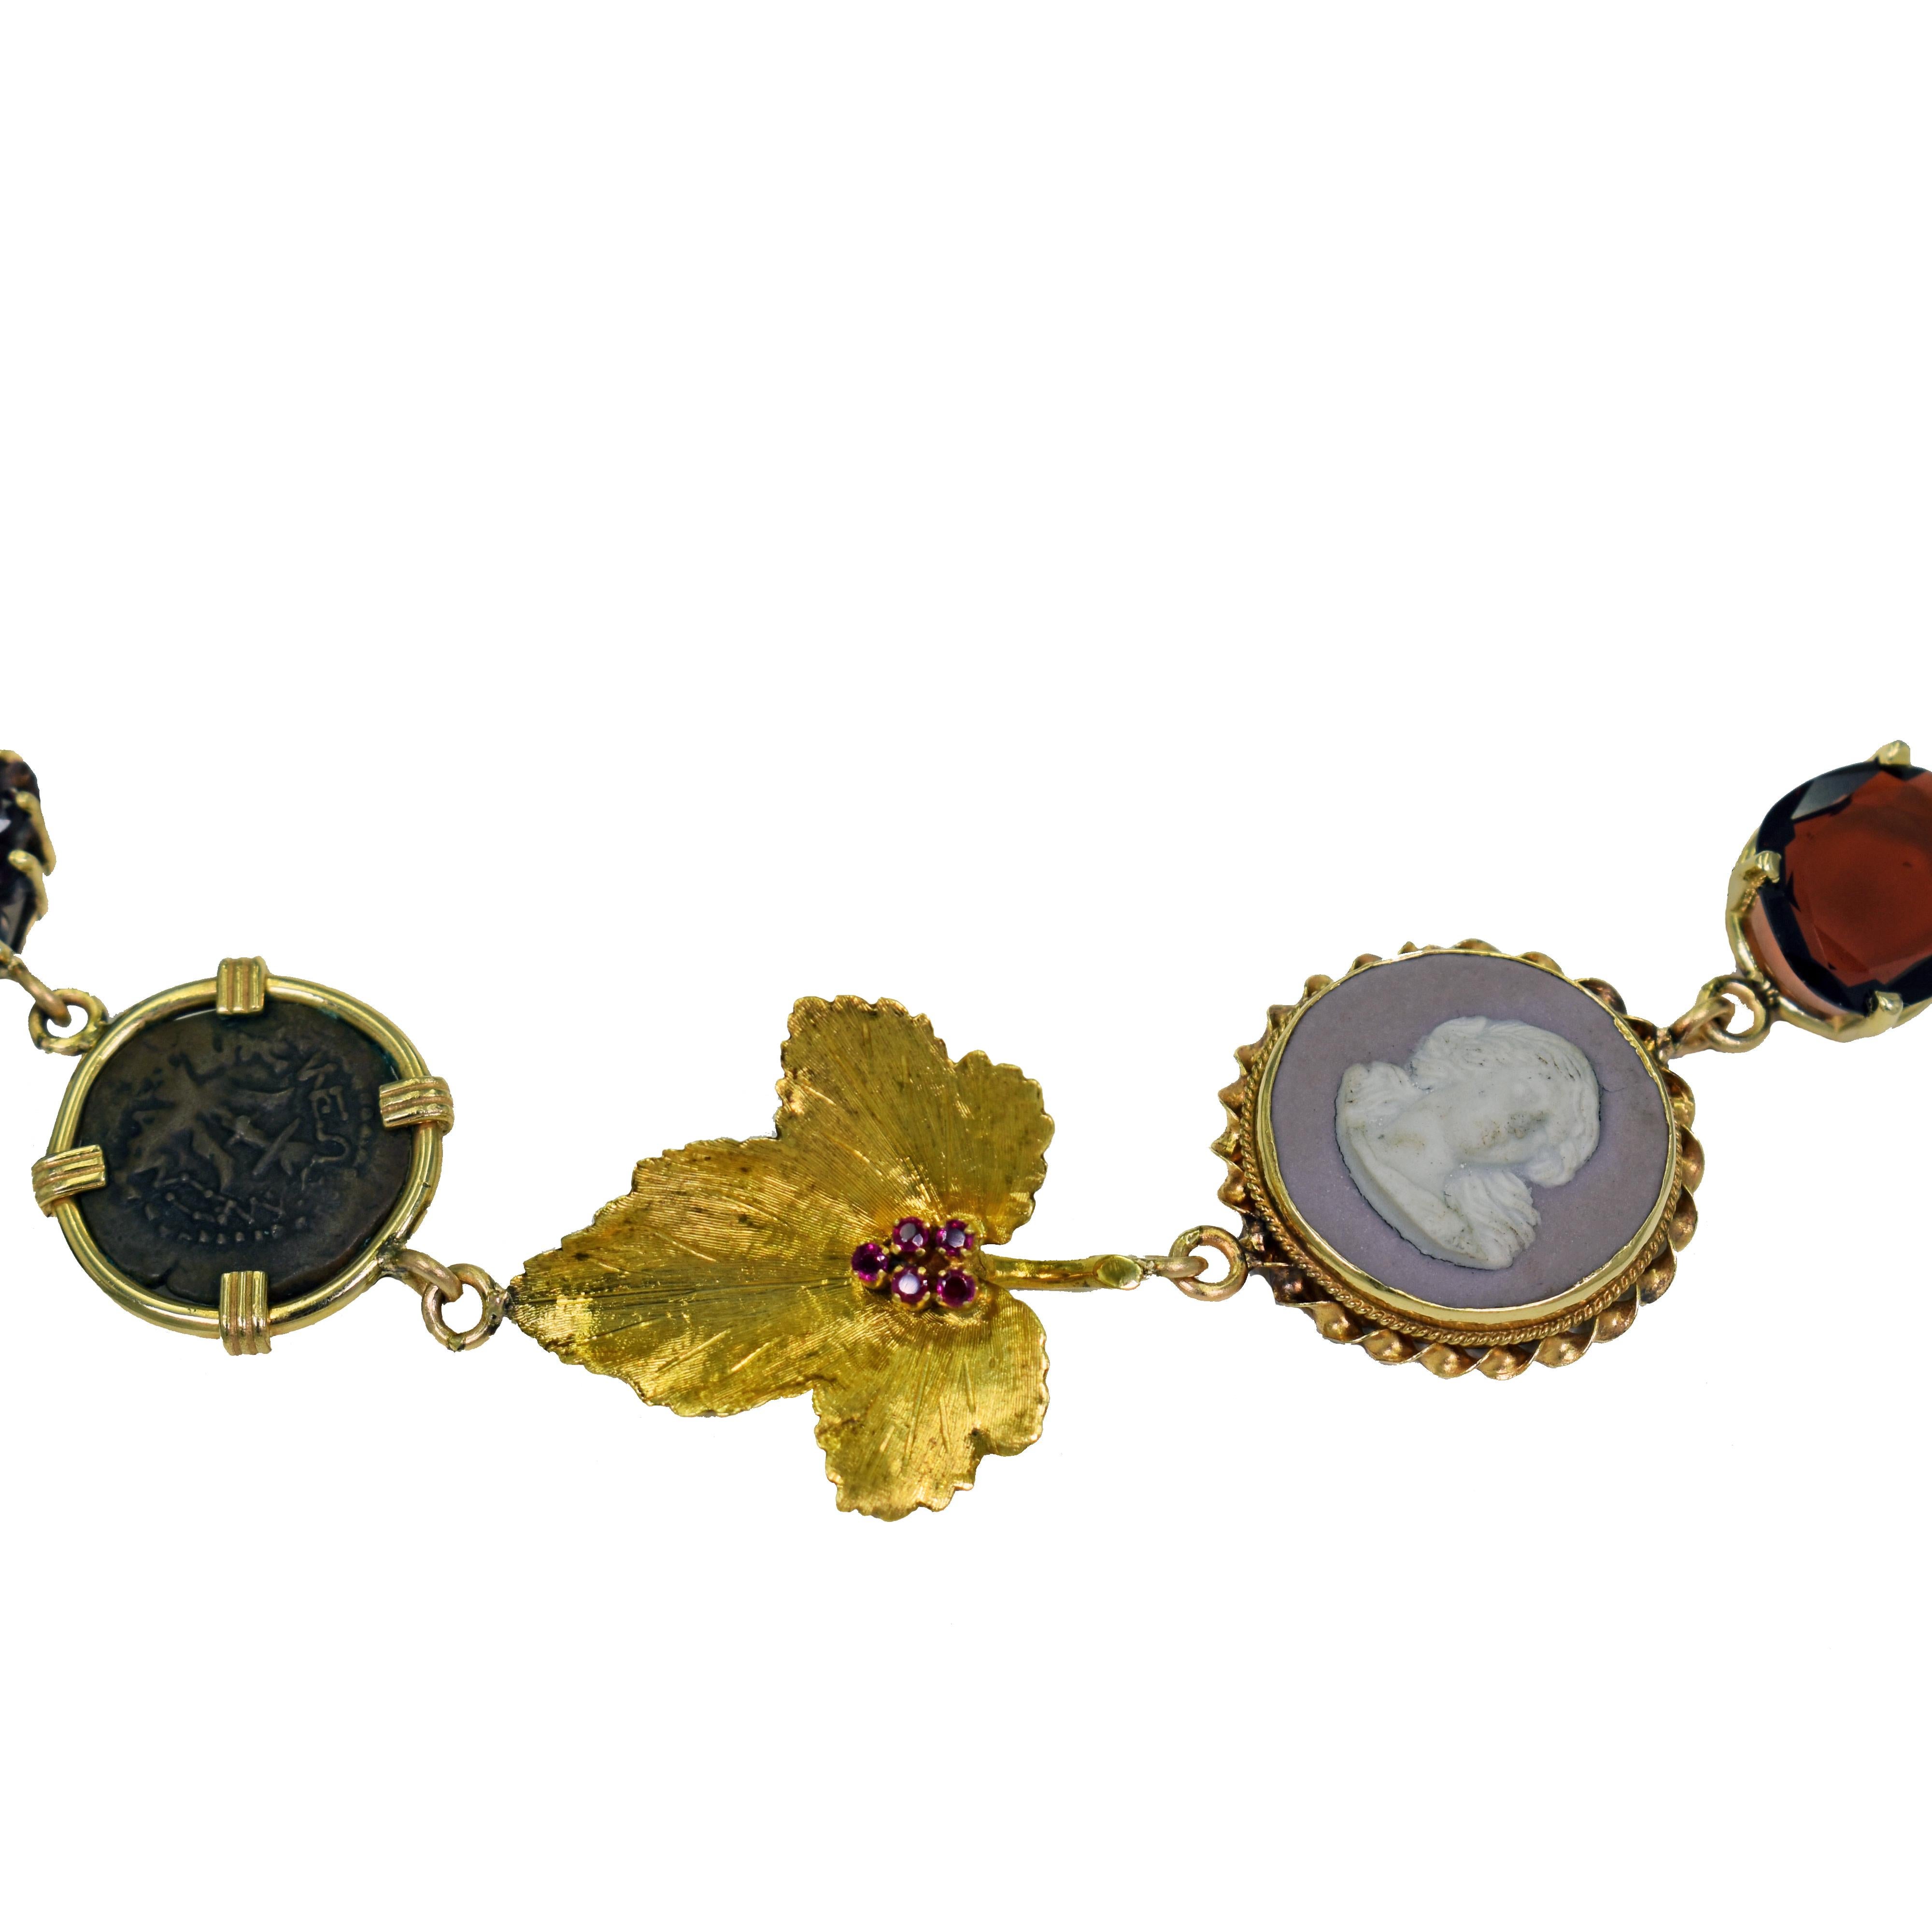 Contemporary Multi-Gemstone, Vintage Pendant and Ancient Coin 14 Karat Gold Bohemian Necklace